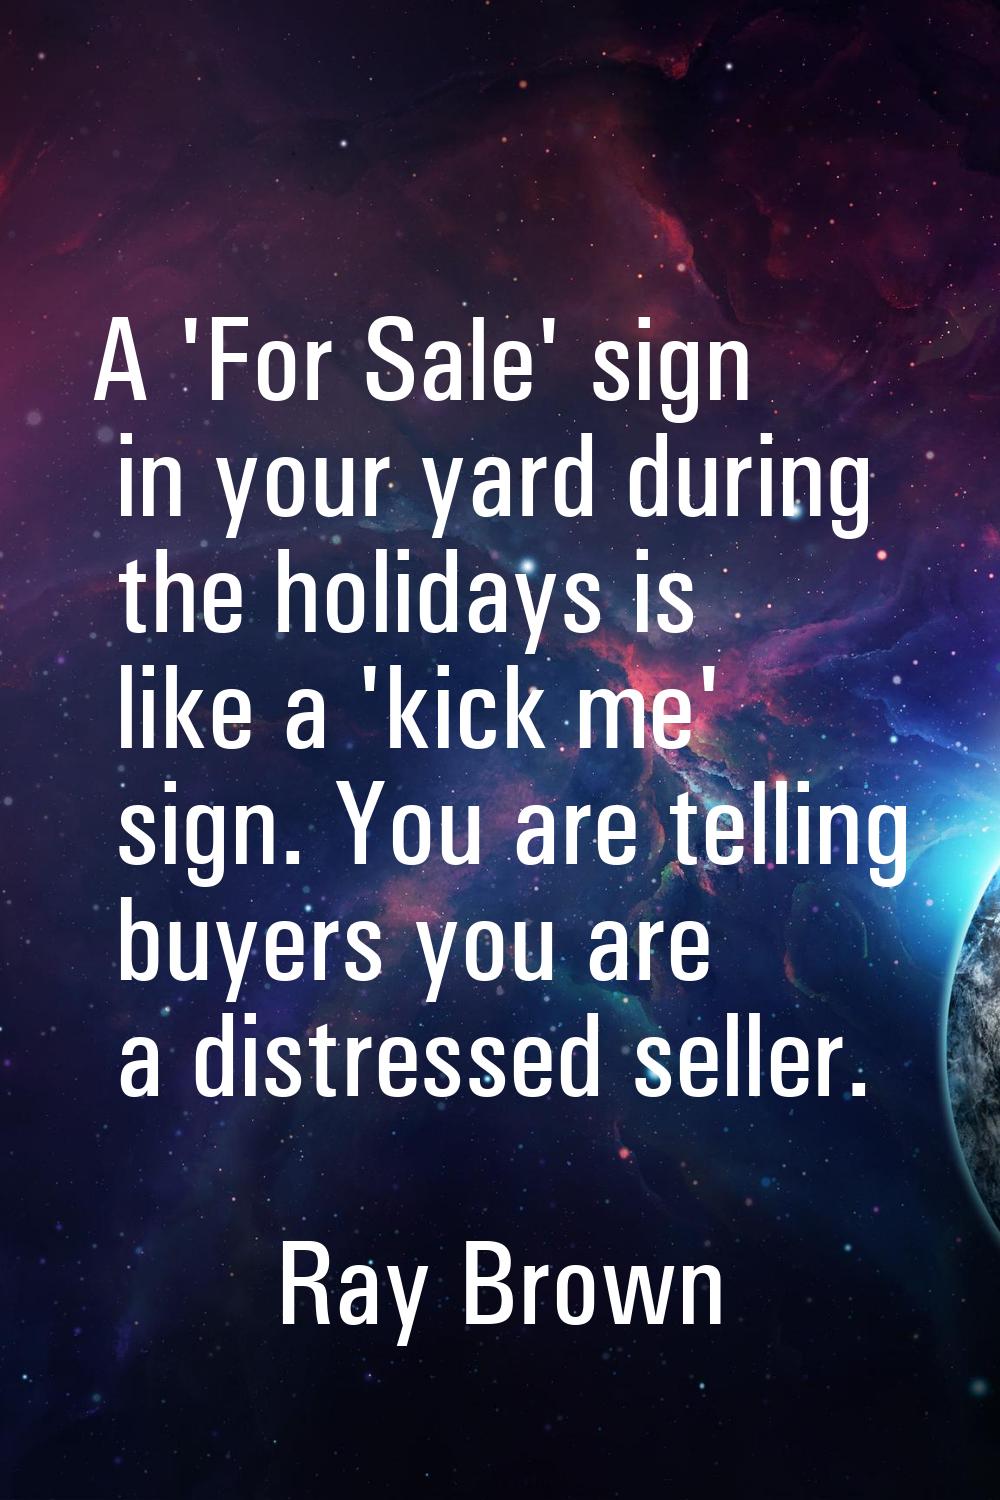 A 'For Sale' sign in your yard during the holidays is like a 'kick me' sign. You are telling buyers